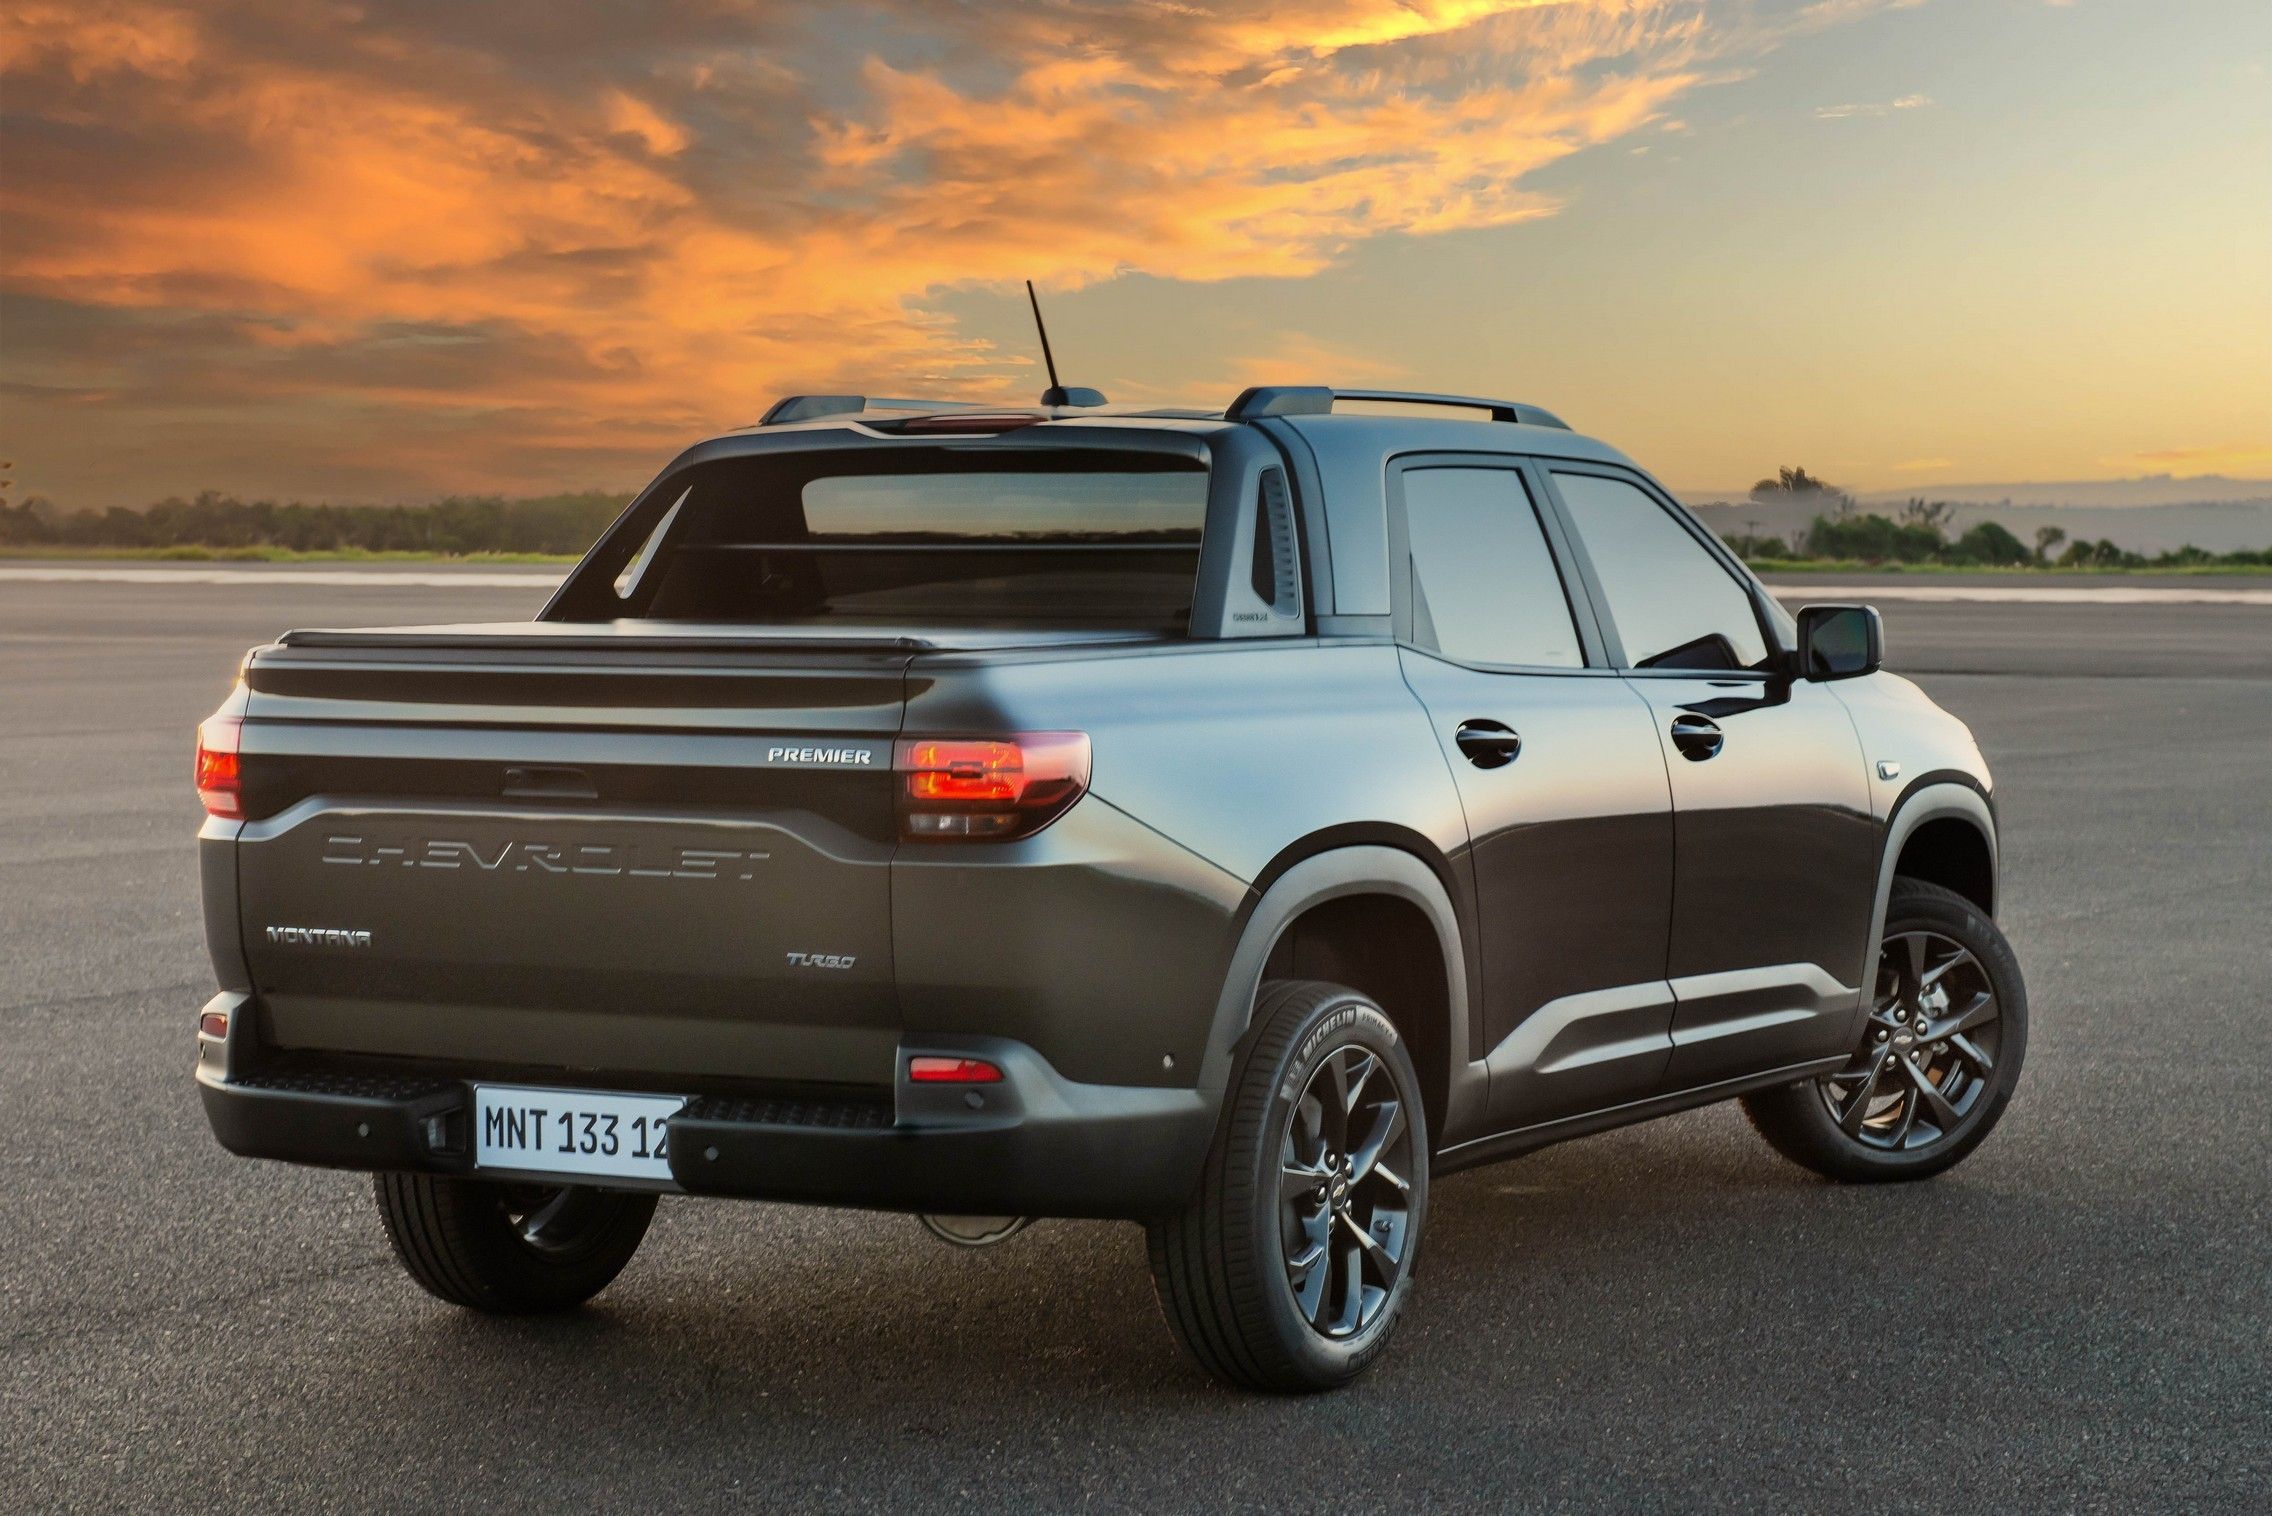 Why The 2023 Chevrolet Montana Is The Compact Truck We Have Been